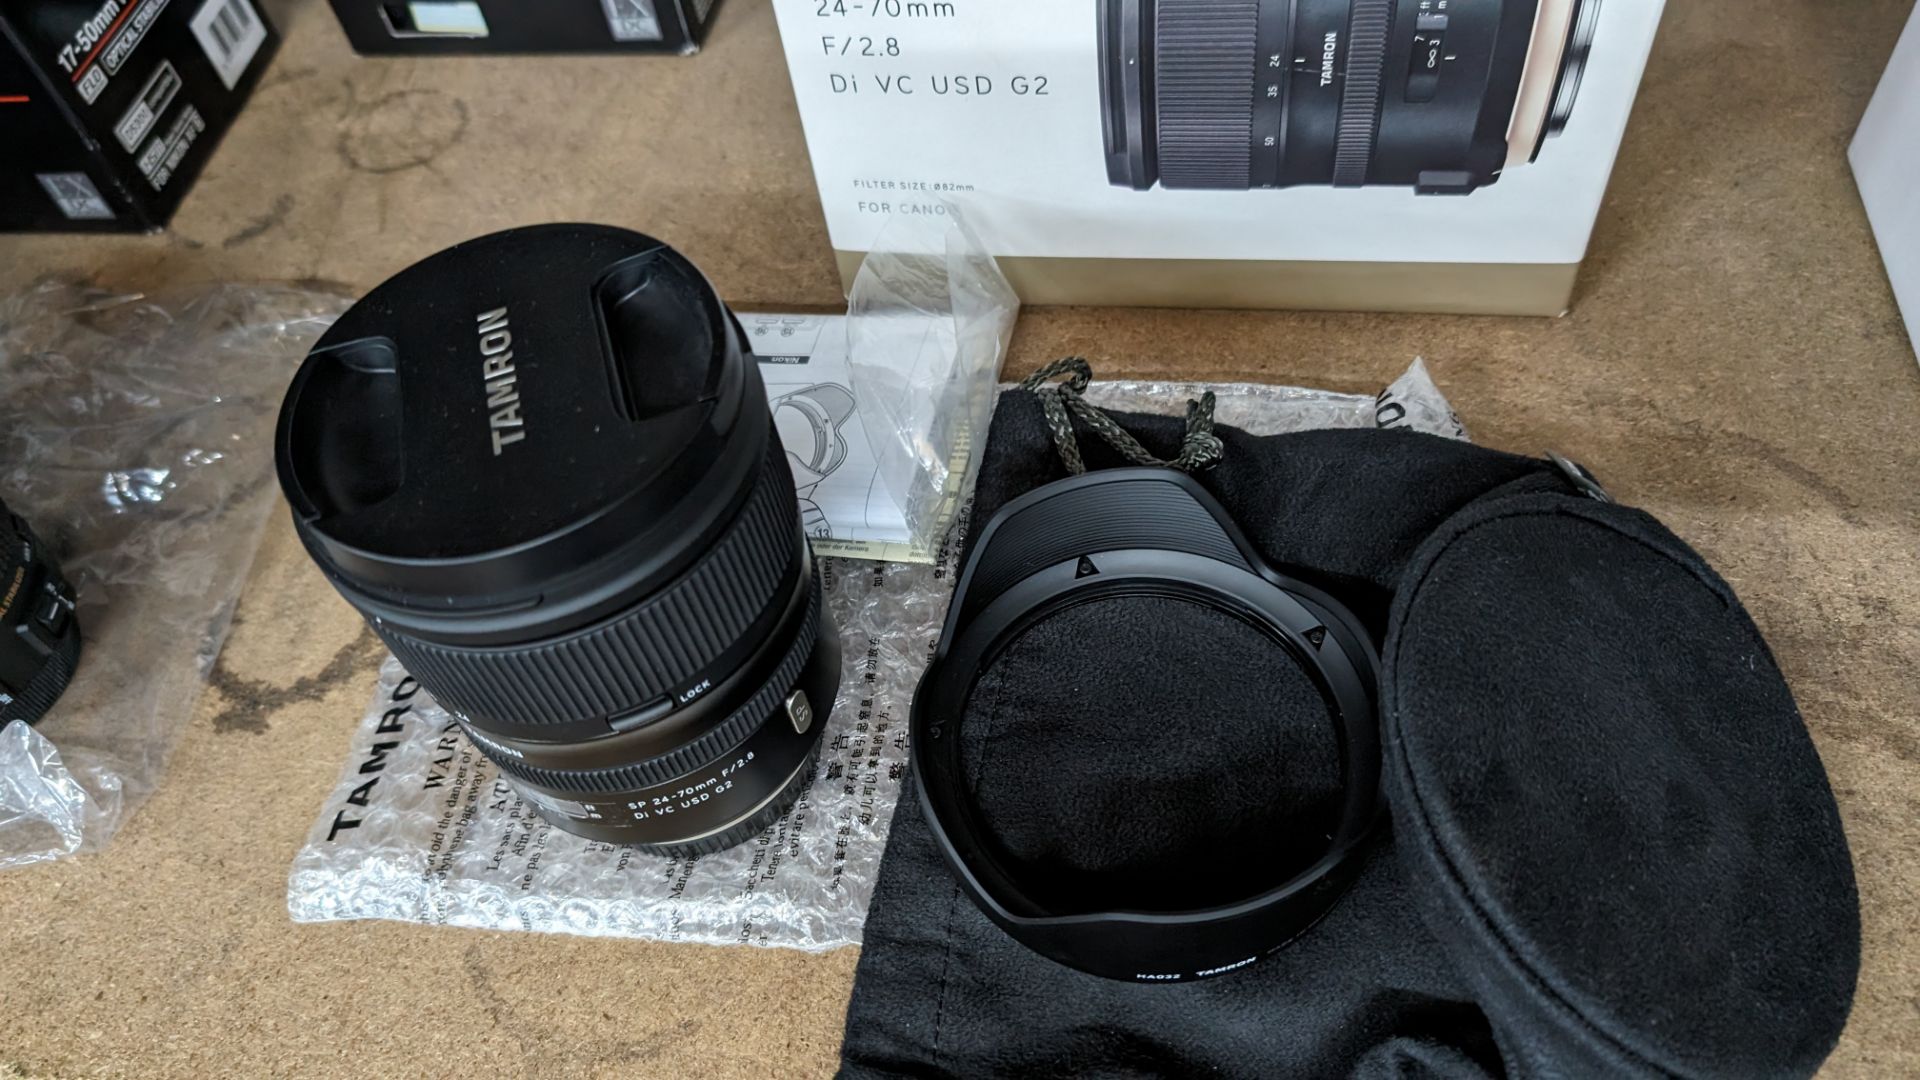 Tamron SP 24-70mm f/2.8 Di VC USD G2 lens, including soft carry case and attachment - Image 5 of 10